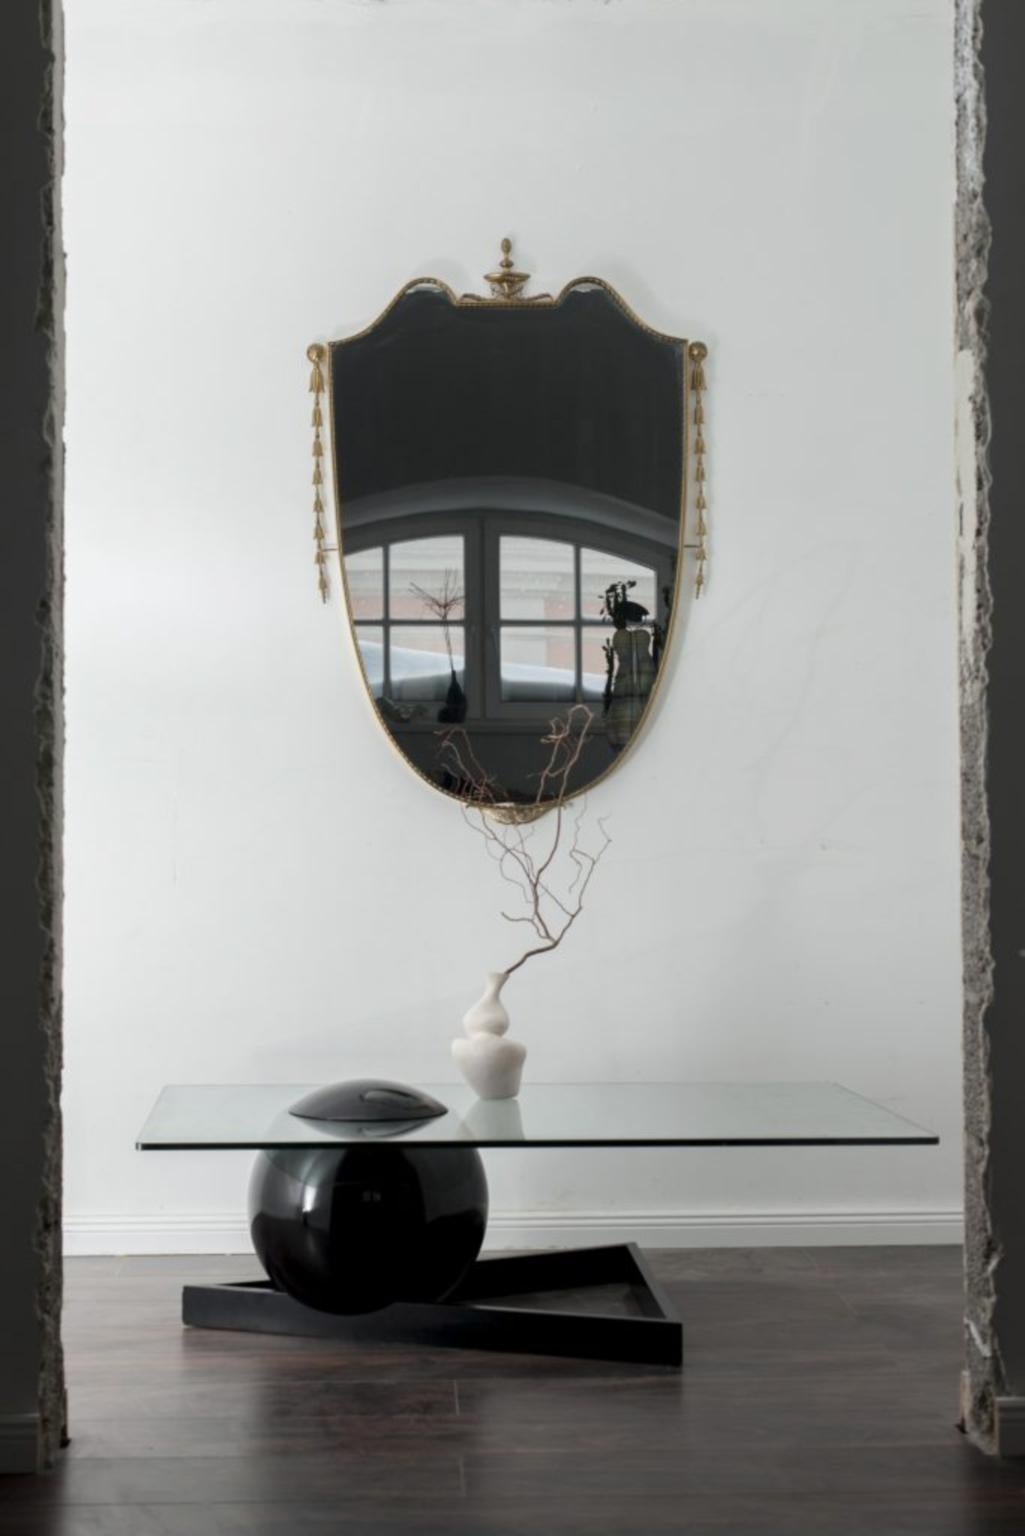 Designer Gio Ponti style antique Italian mirror.

This is a piece of history and just a pure touch of Italian glamour to your home.

Mirror is not just a functional piece, but a work of art that will become a focal point in any space. Hang it in